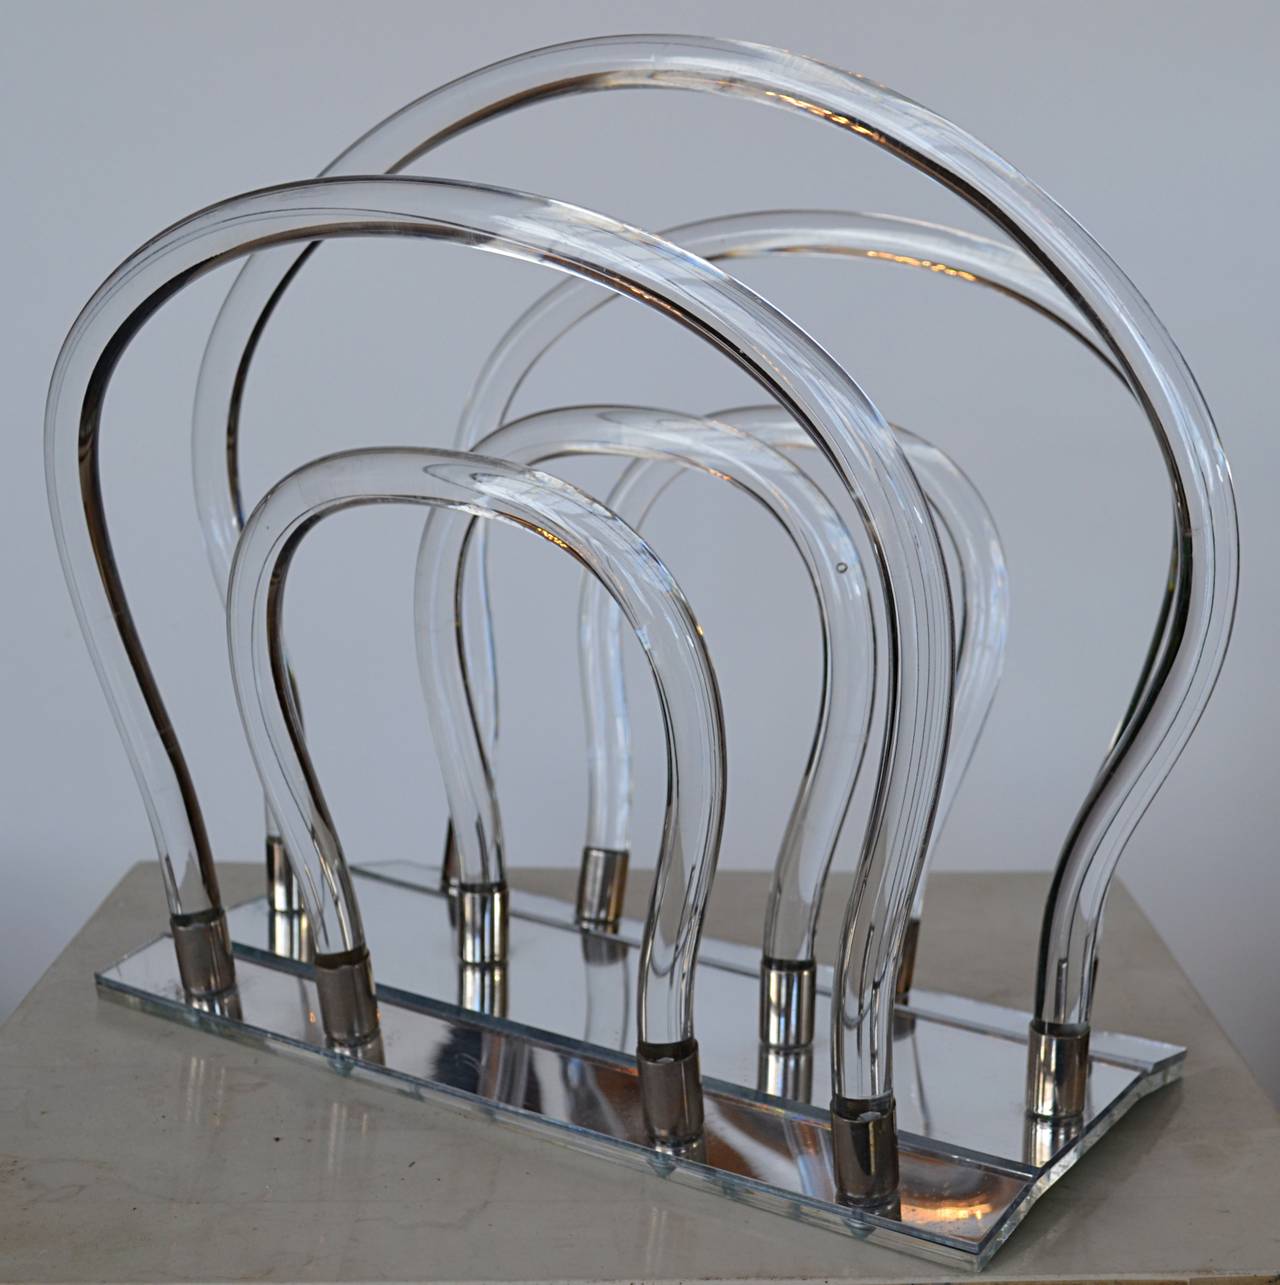 A classic Thorpe design executed in bent acrylic rods with chrome fasteners attached to mirrored base.